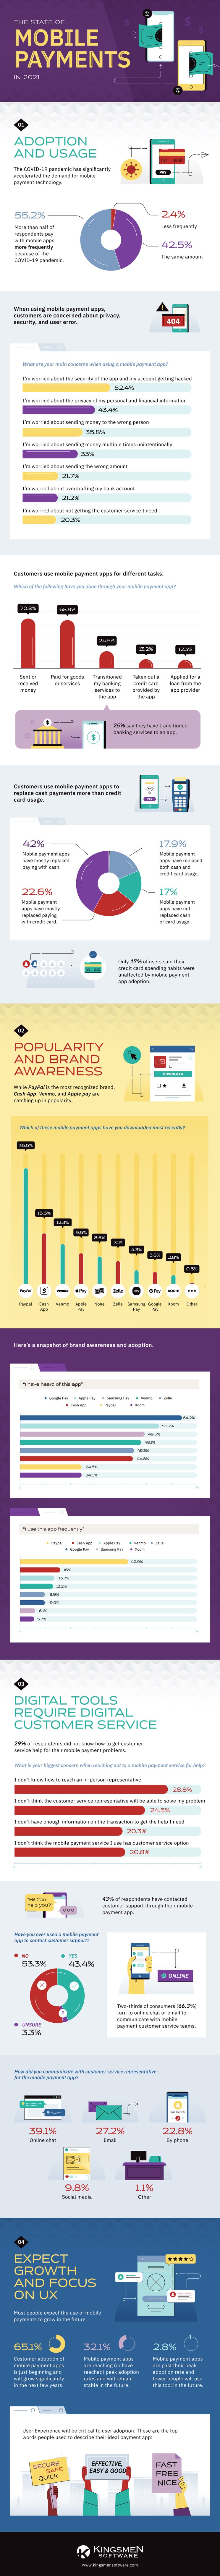 KNG701 - Mobile Payments Infographic